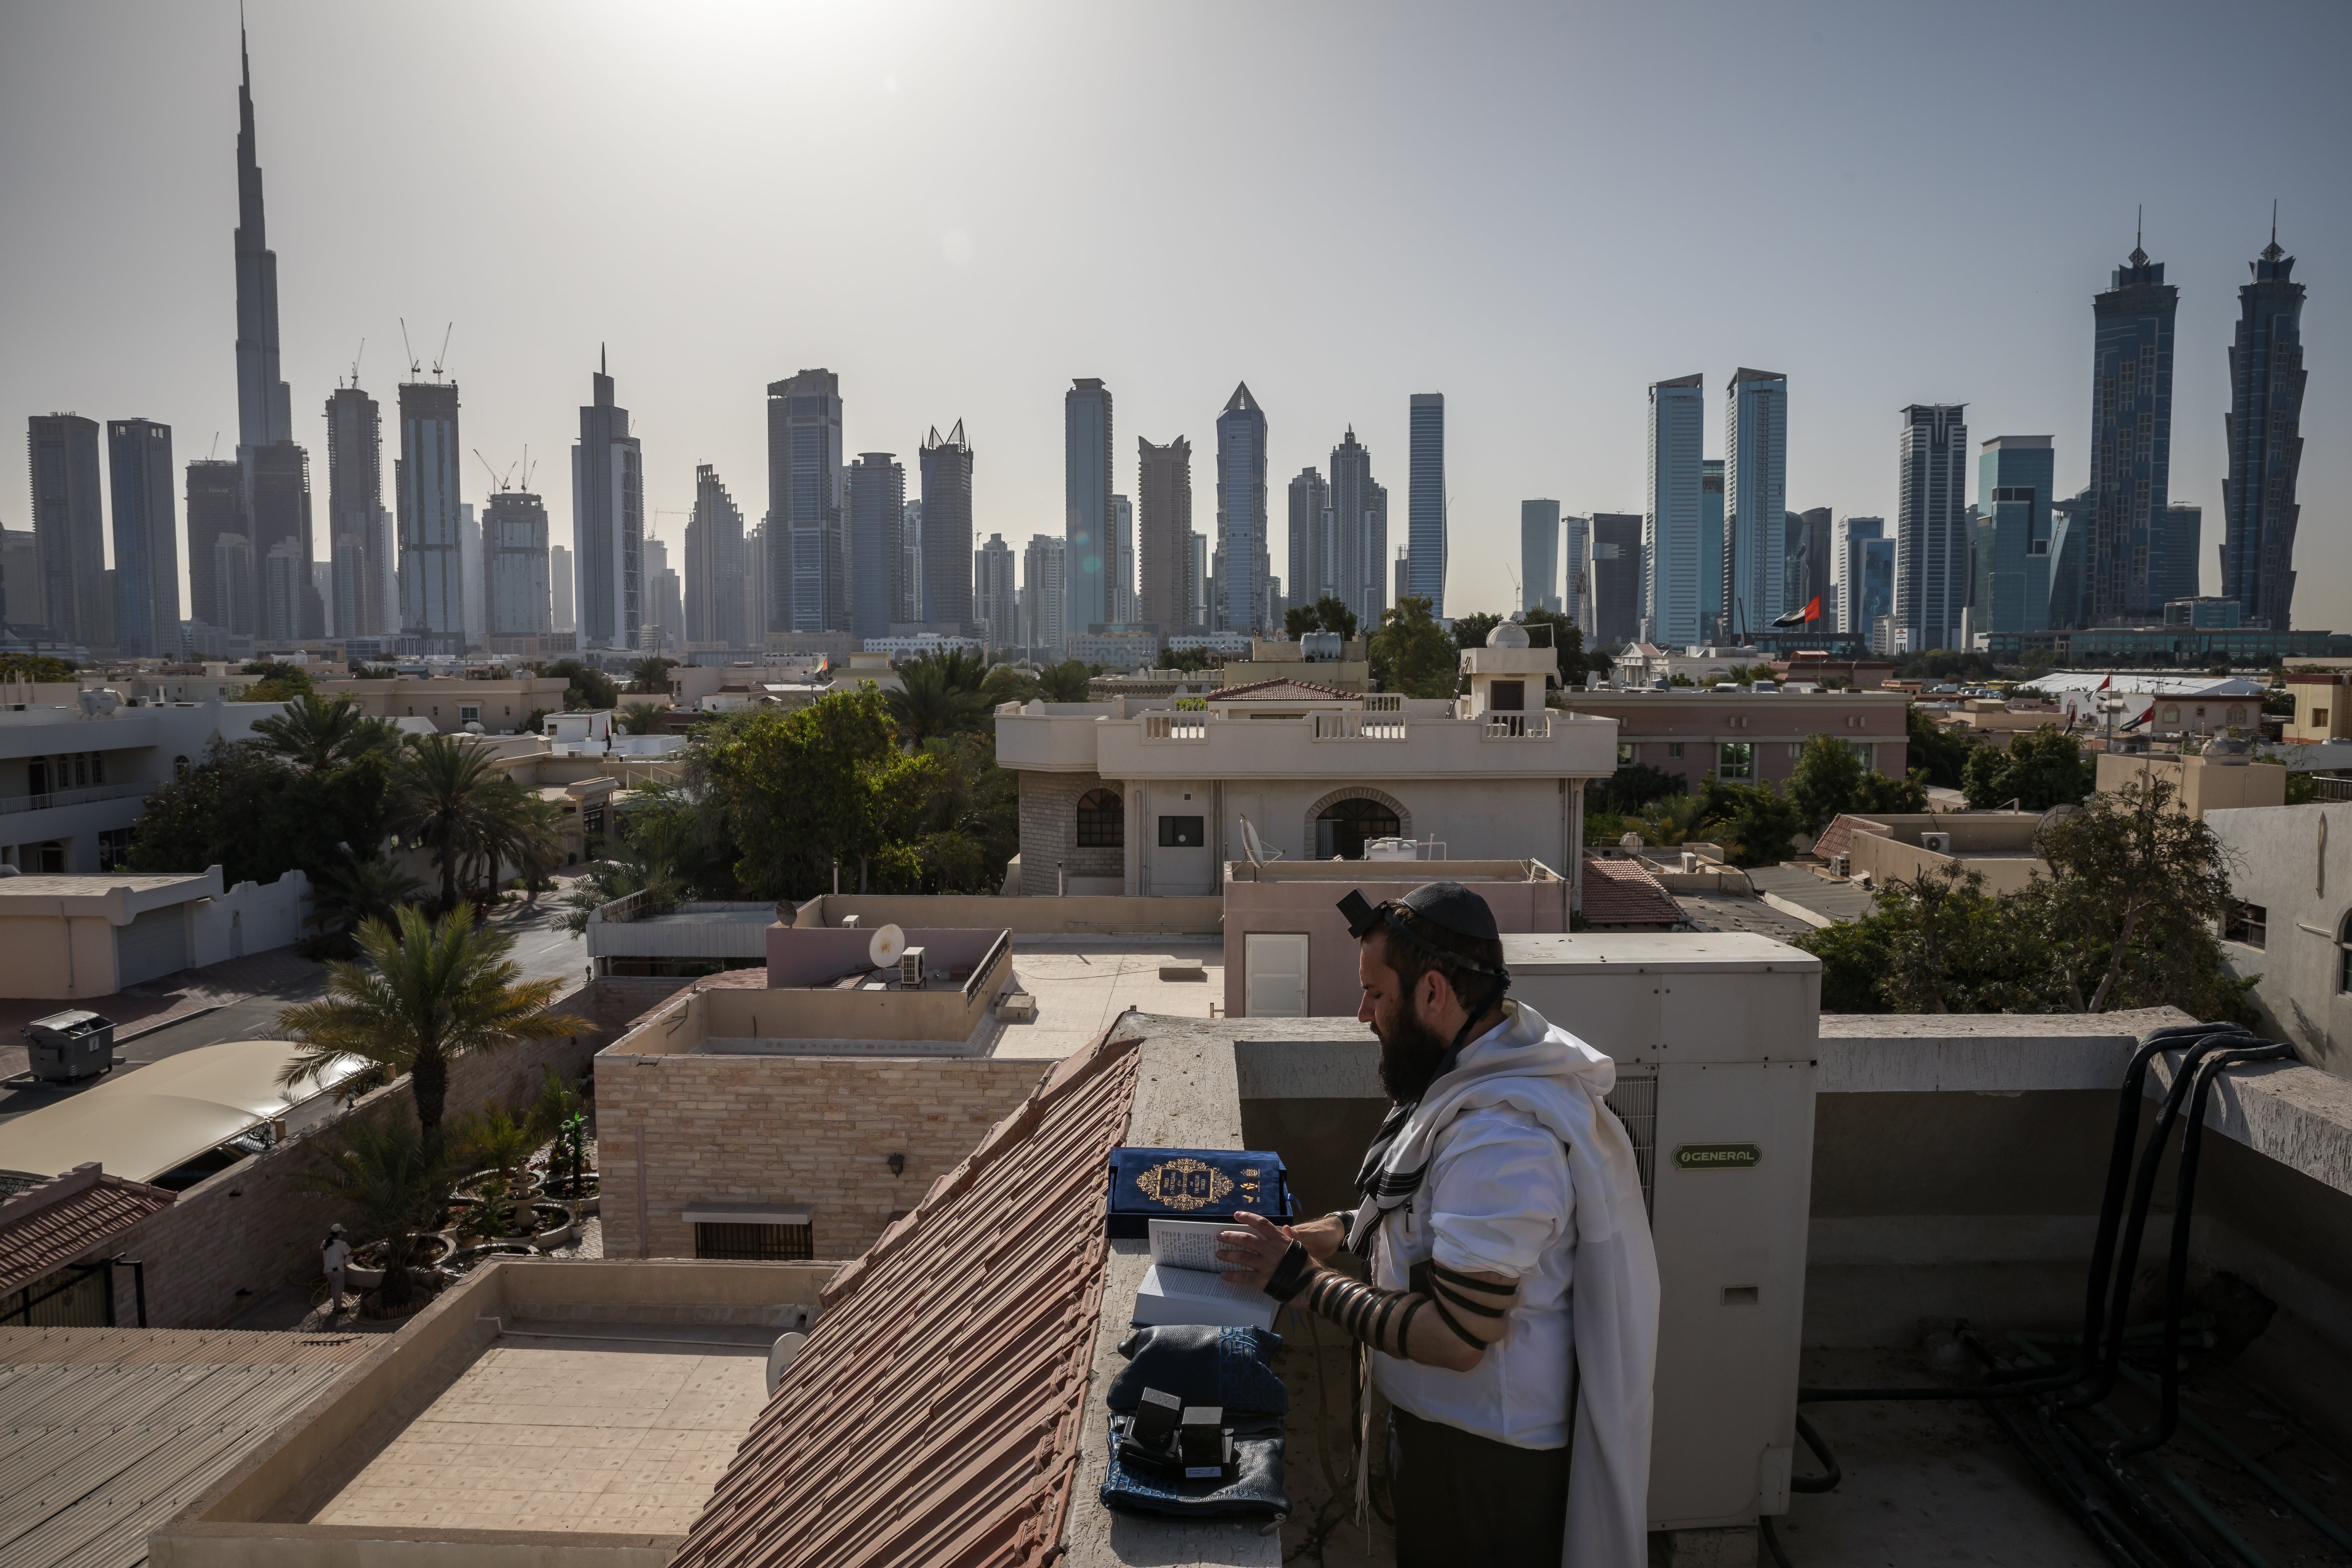 Rabbi Levi Duchman performs morning prayers on the roof of the Jewish Community Center of the UAE